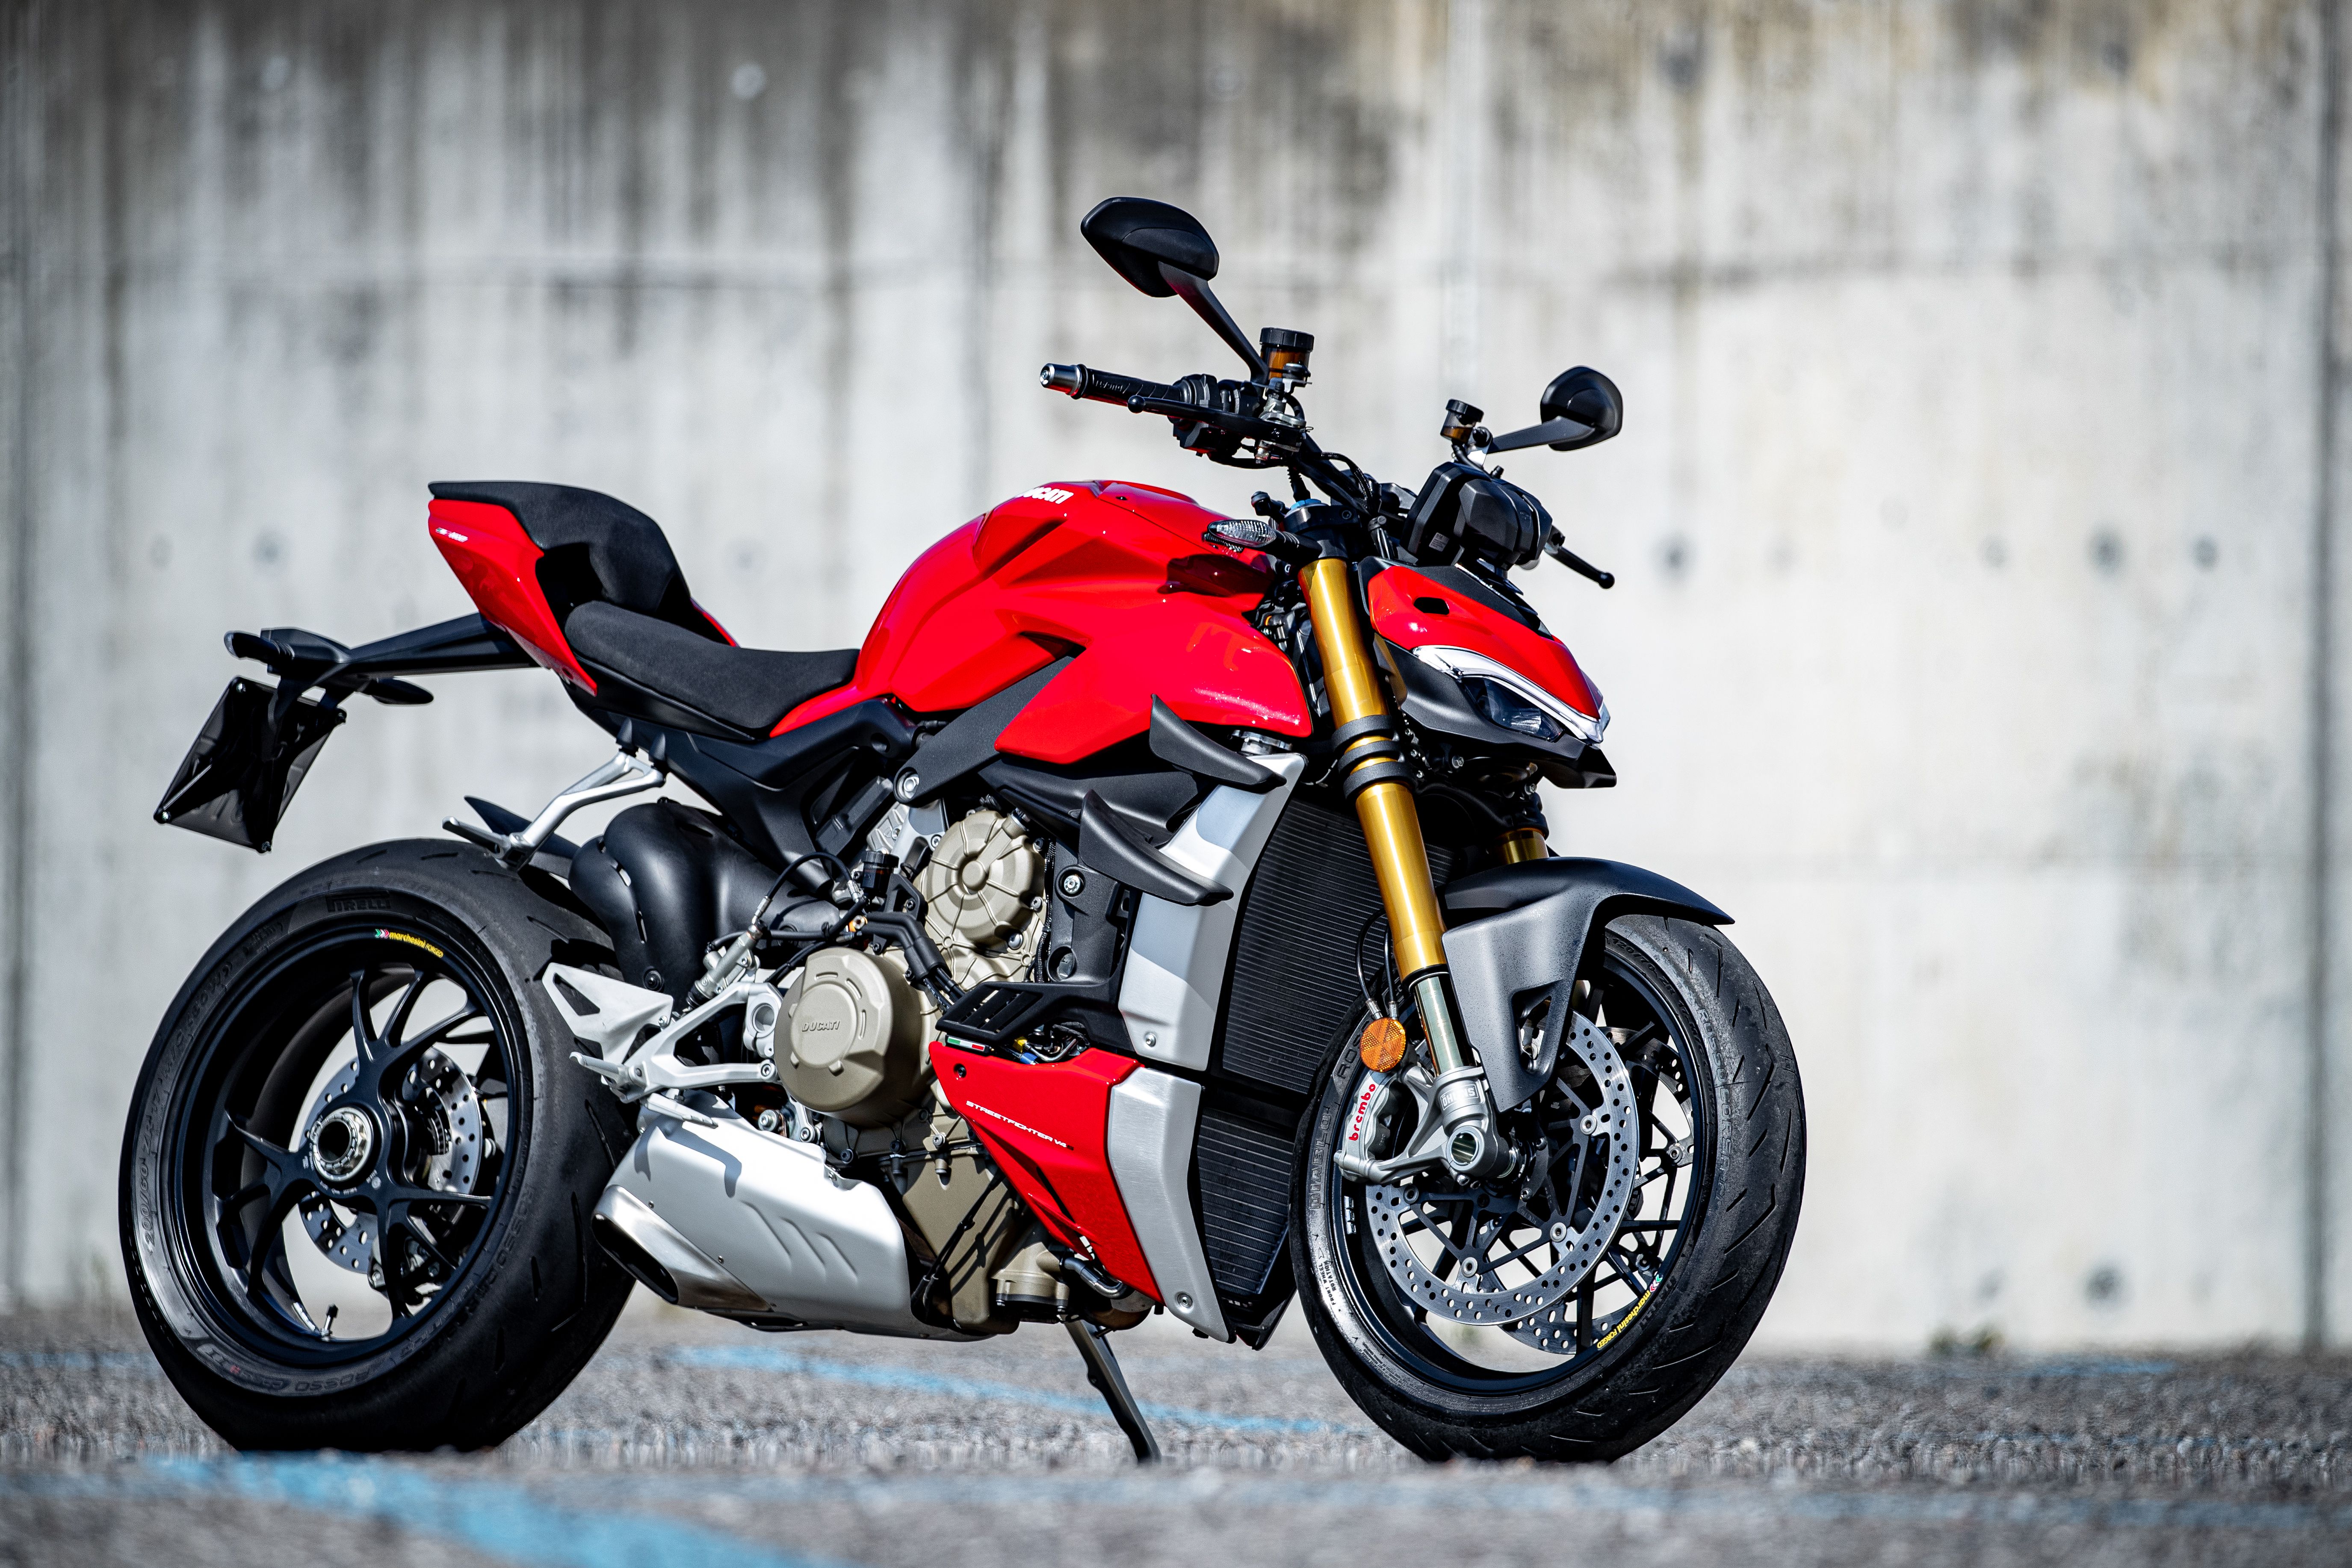 Ducati Streetfighter V4 Brings Motogp Tech To The Road Cycle World